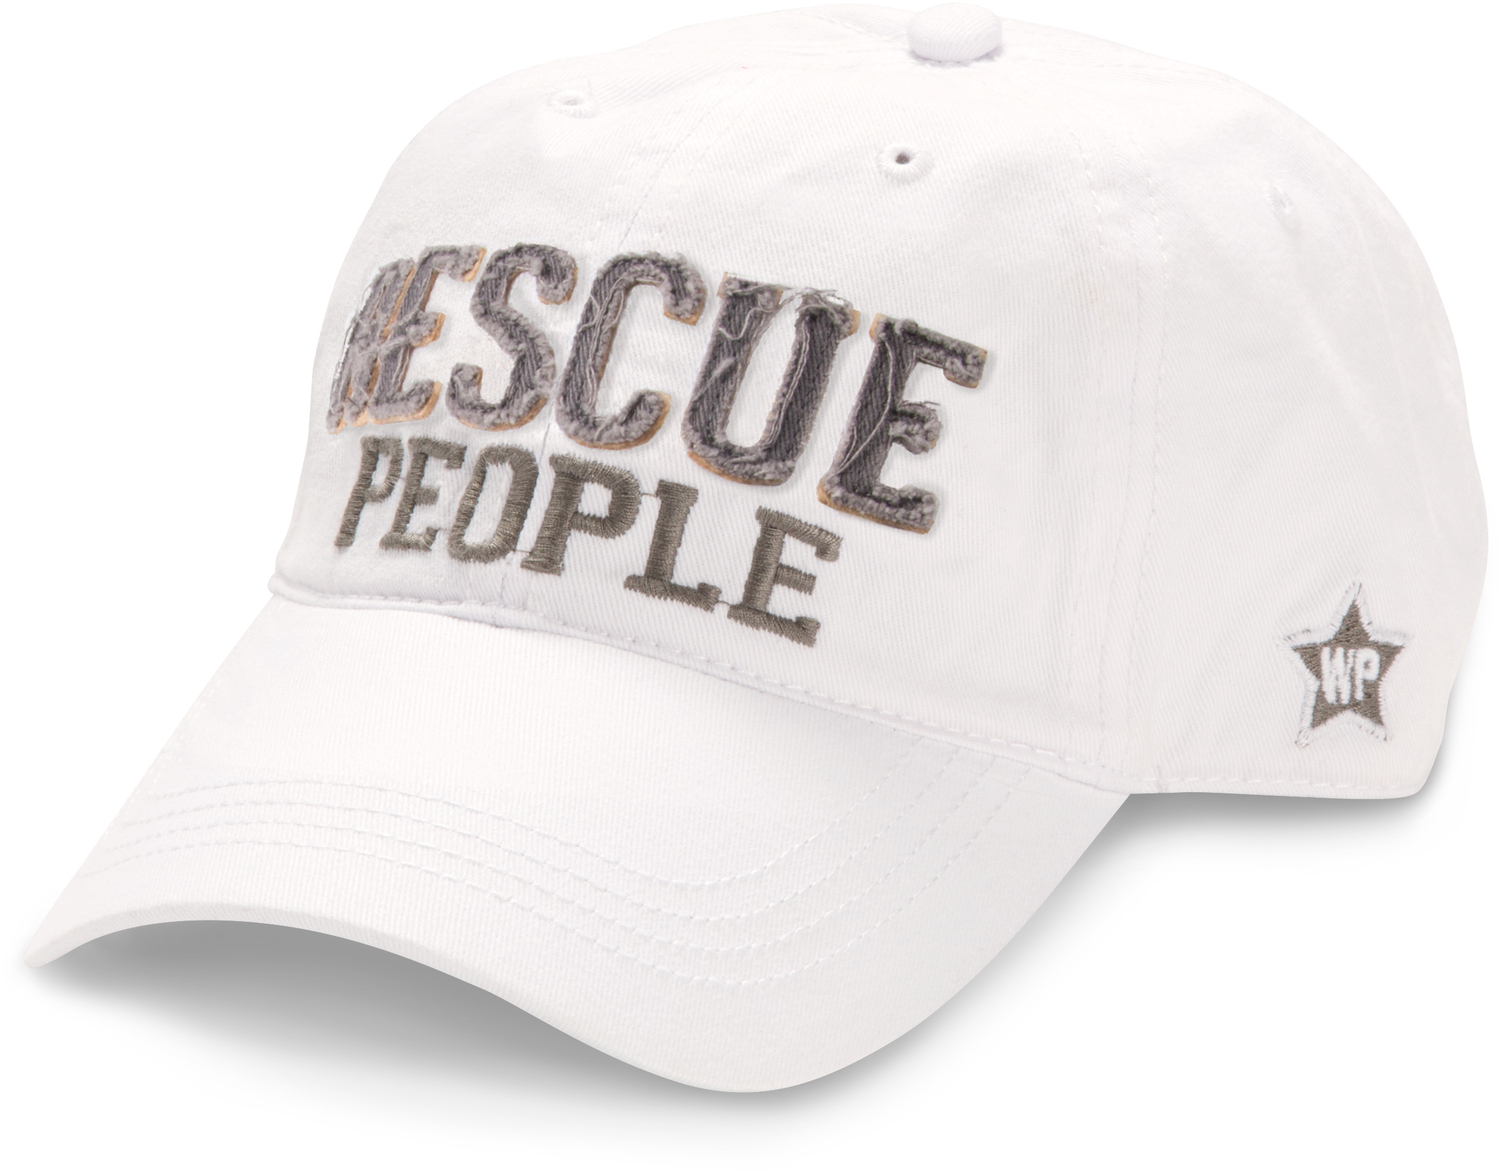 Rescue People by We People - Rescue People - White Adjustable Hat